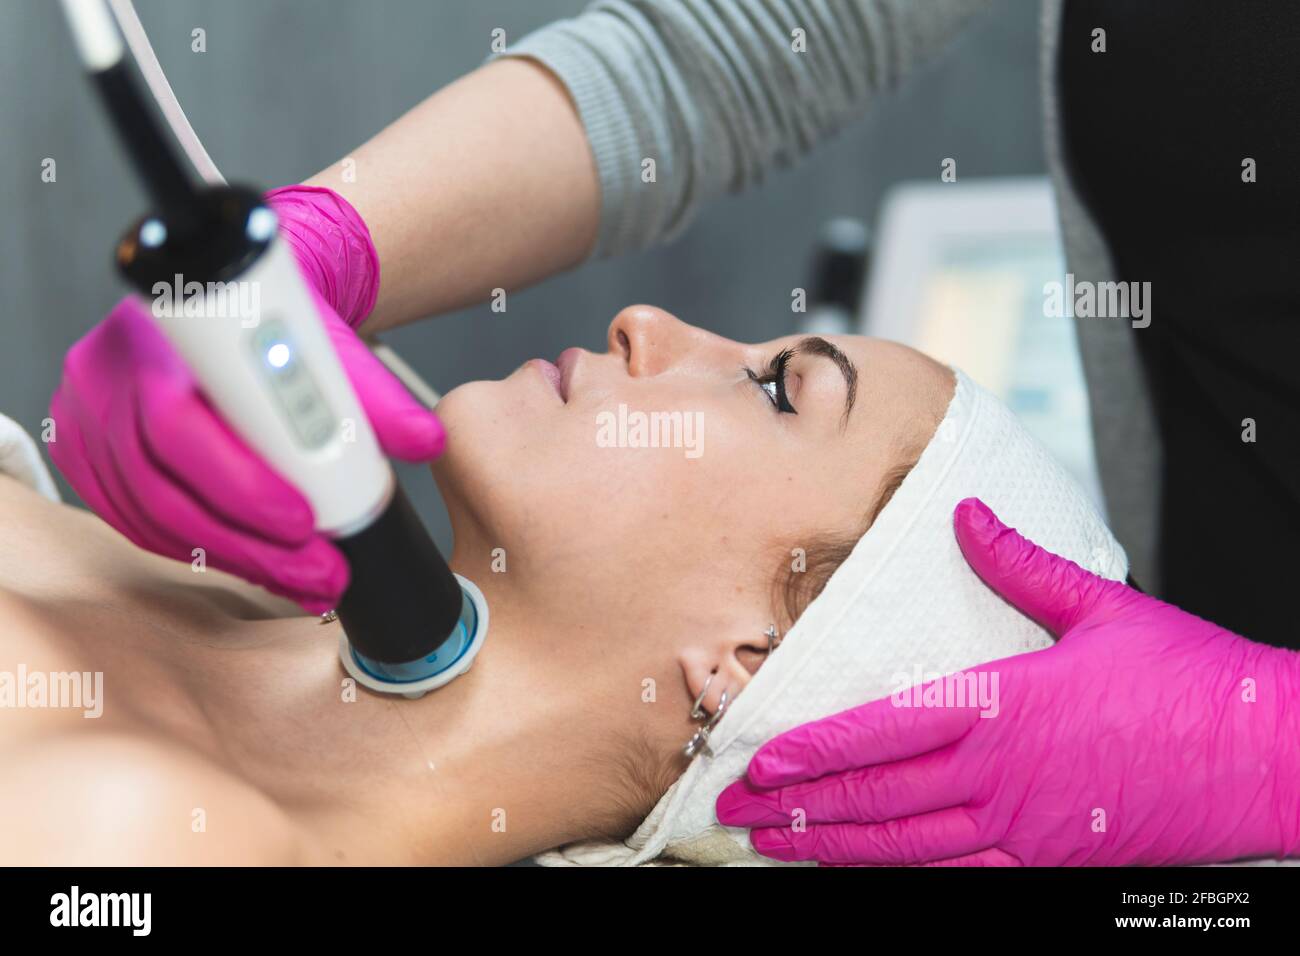 Head of young woman during skin treatment at aesthetic center Stock Photo